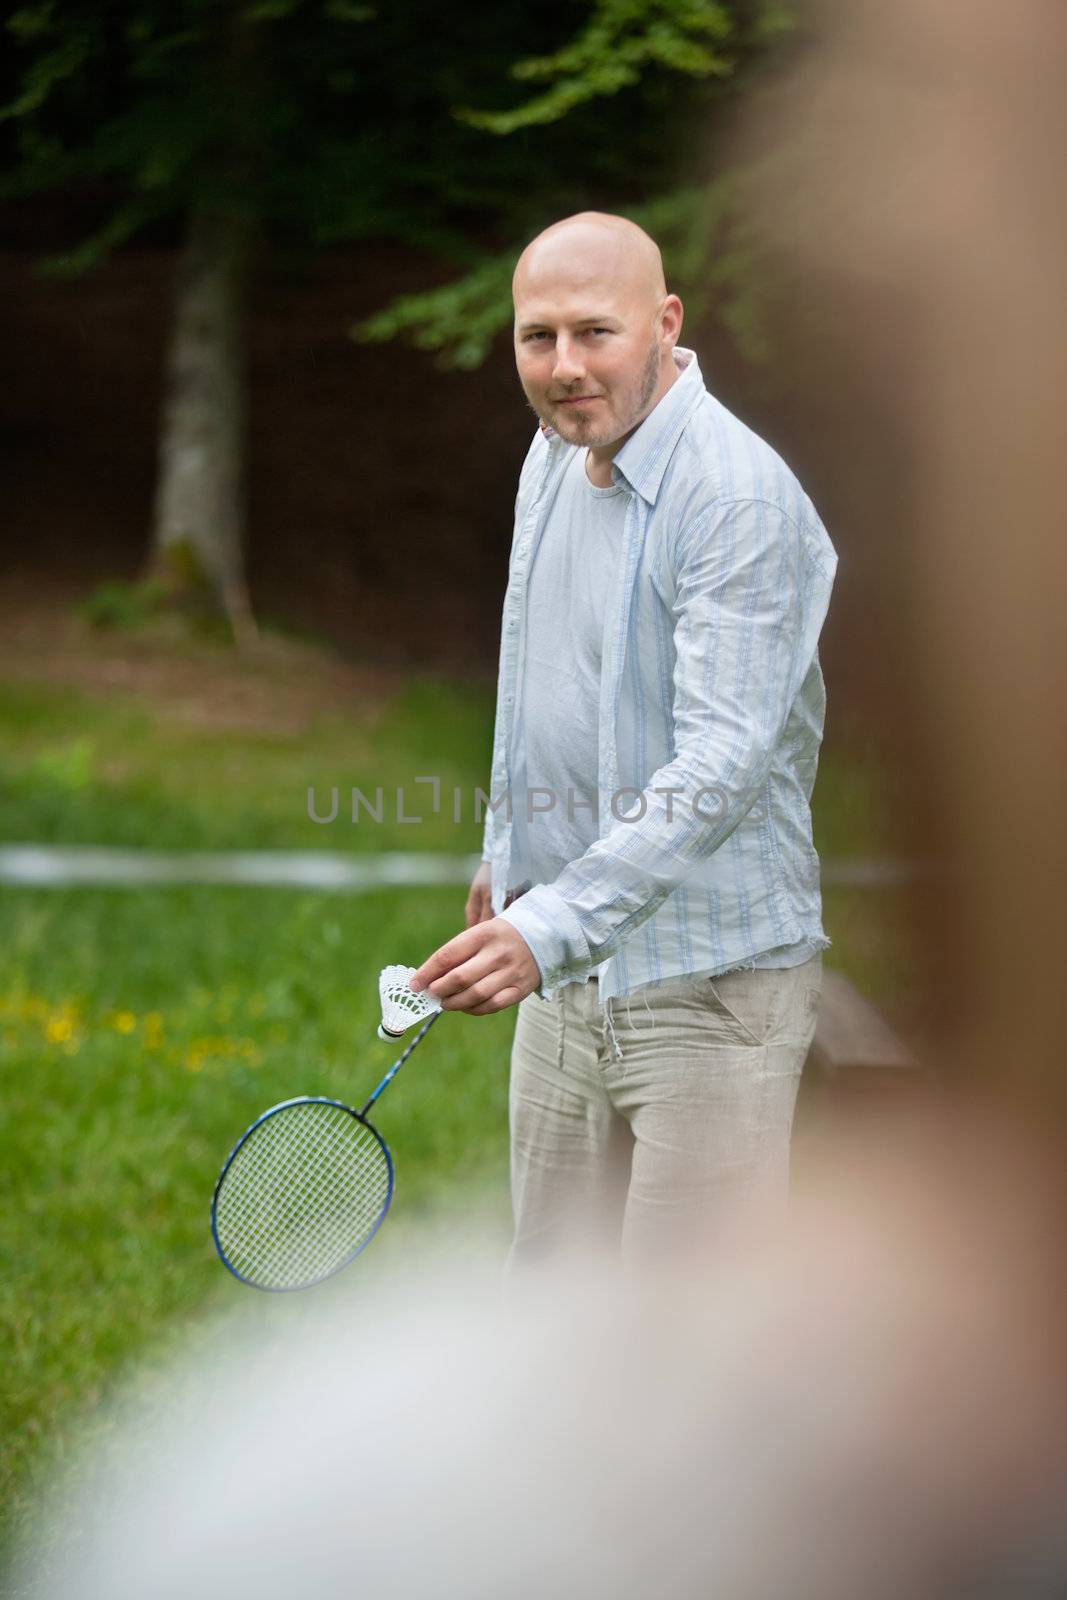 Man Playing Badminton In Park by leaf